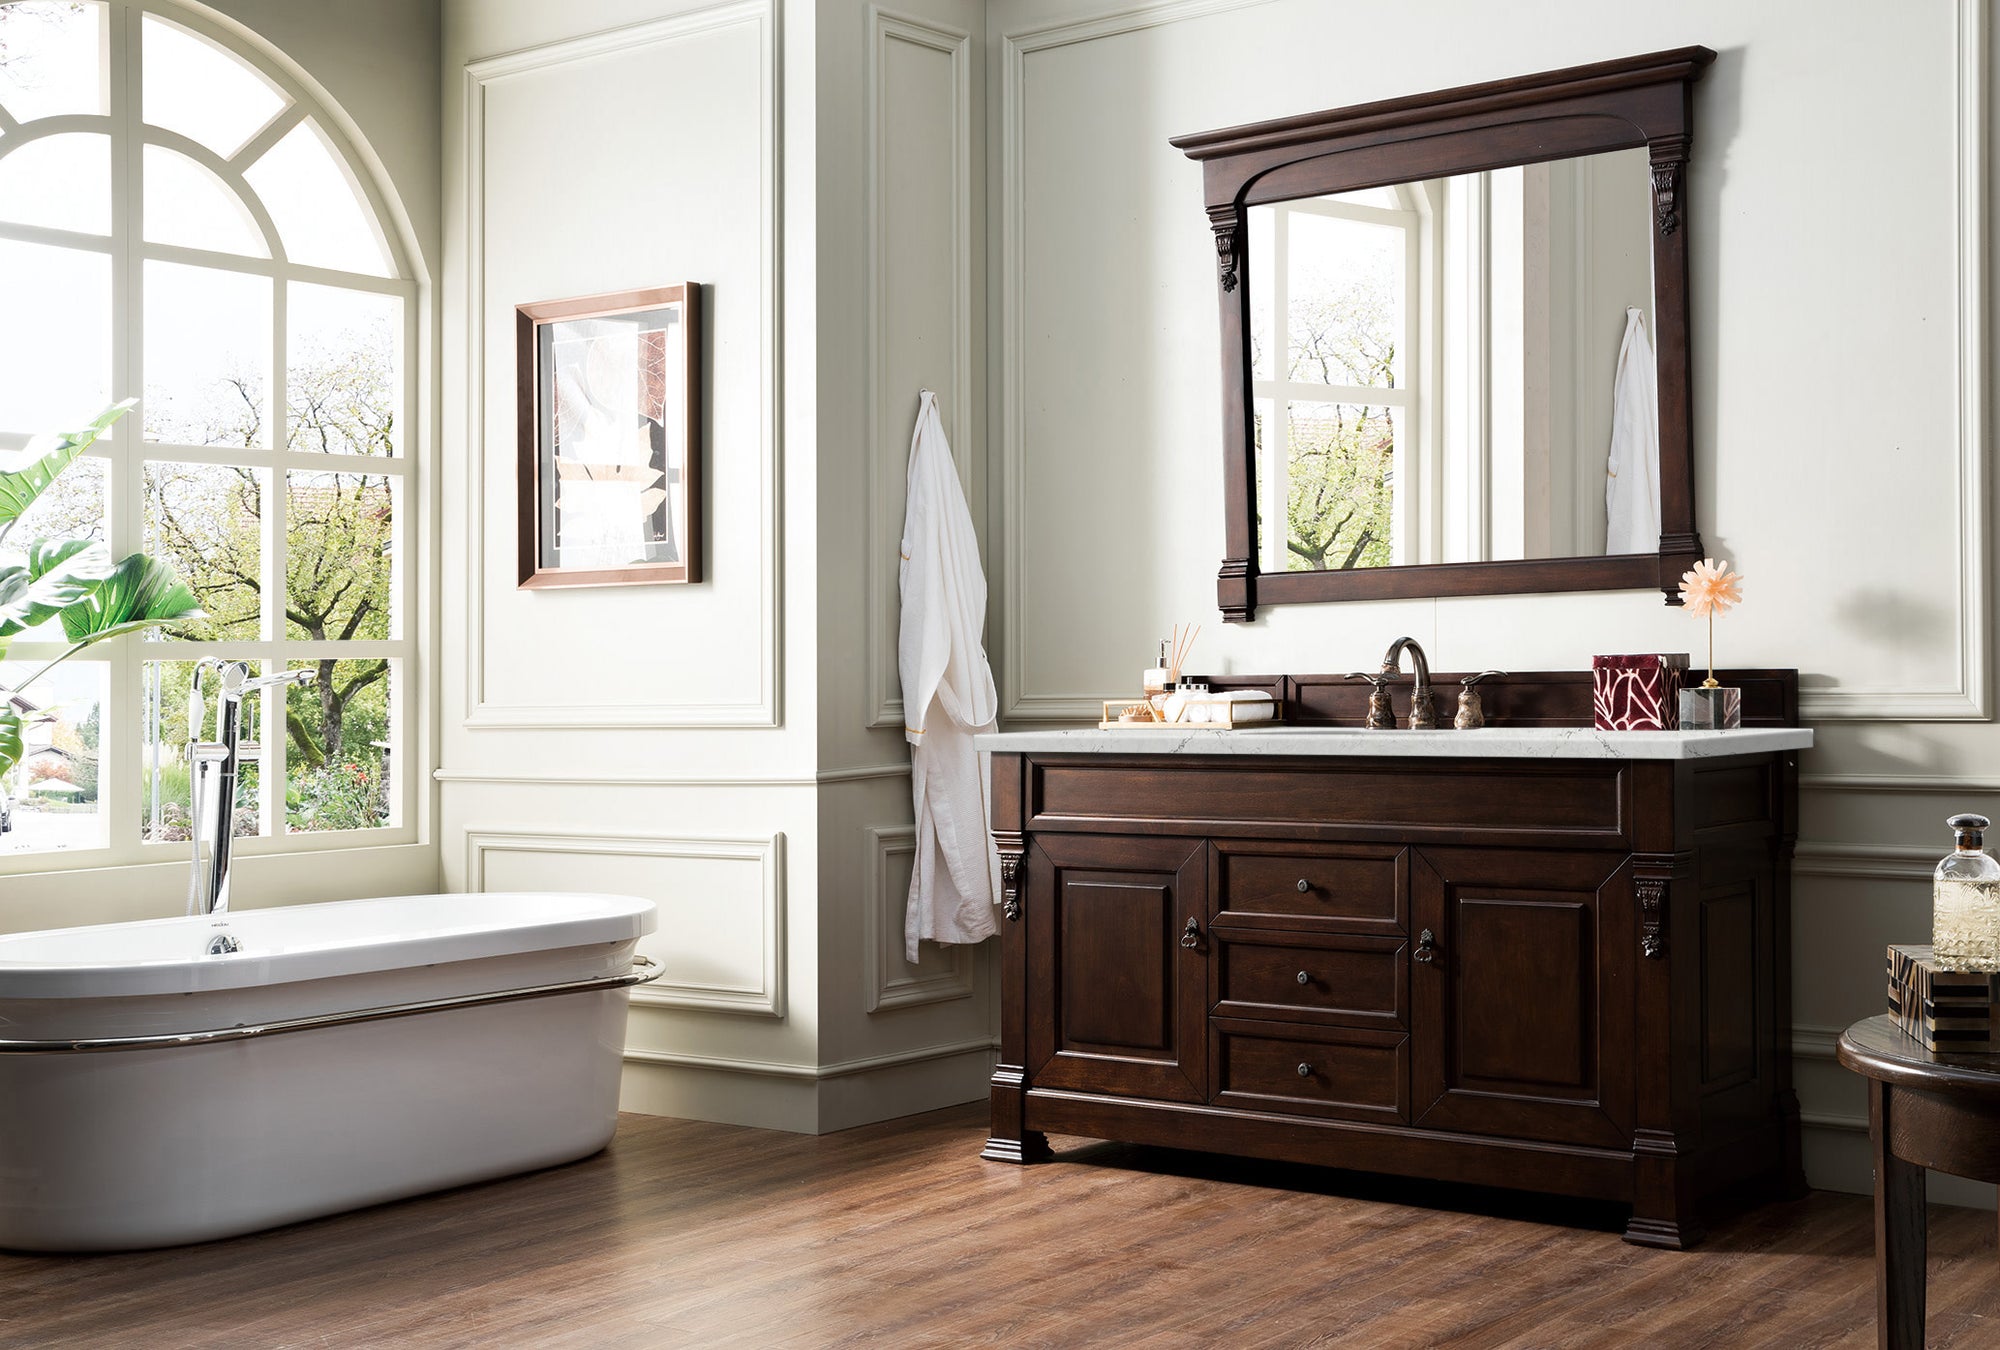 Mistakes to avoid during a bathroom renovation